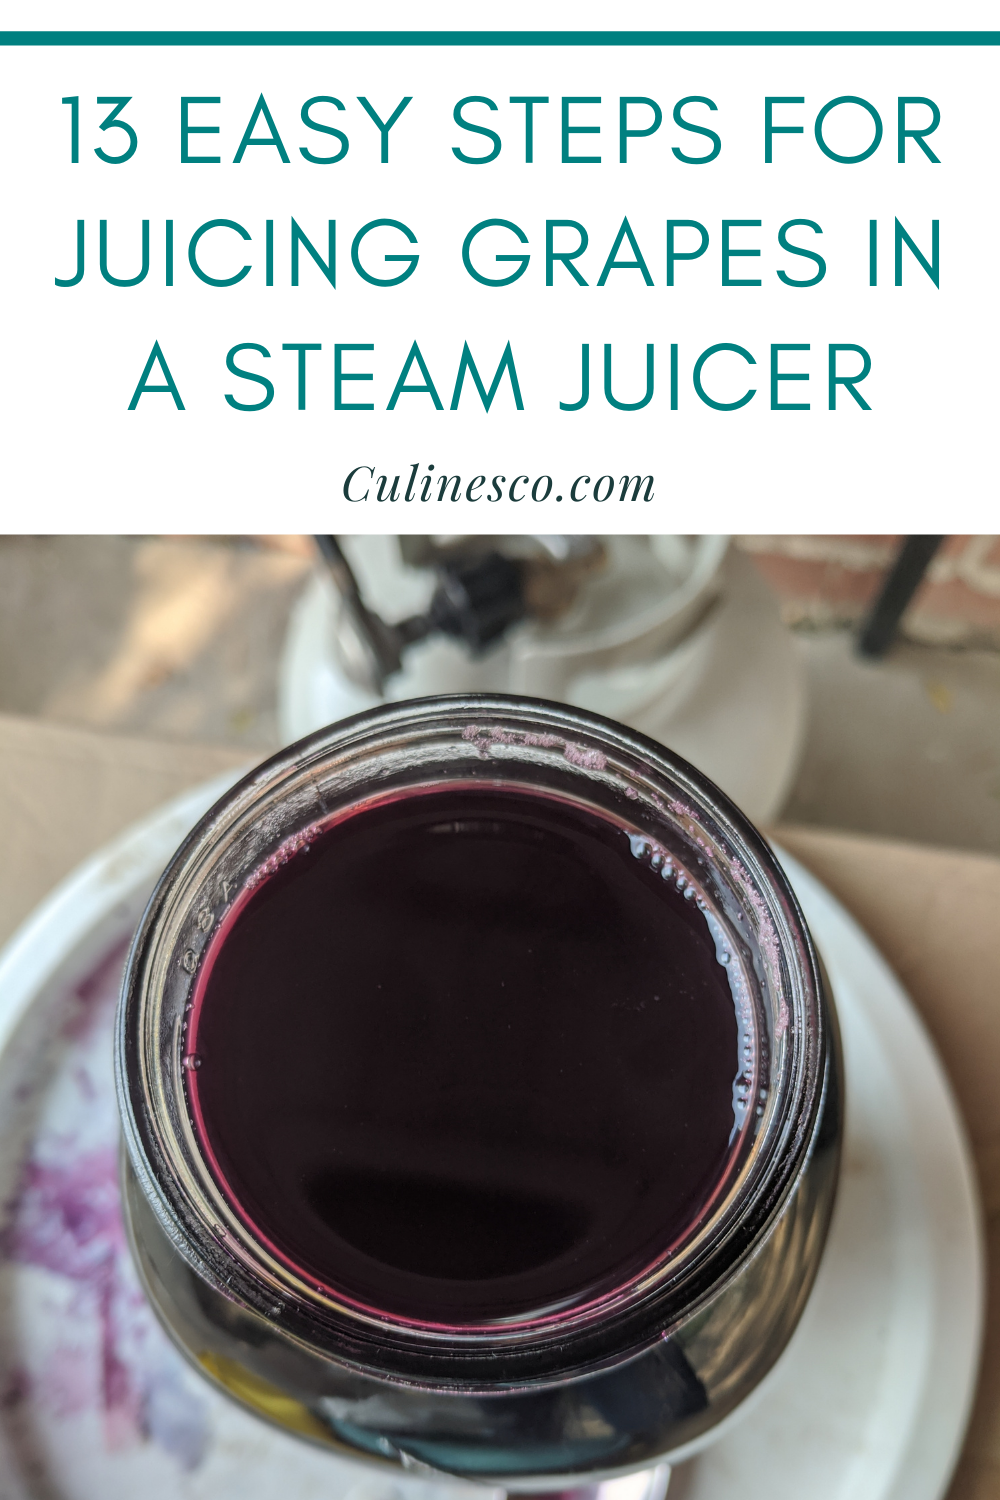 13 Easy Steps for Juicing Grapes in a Steam Juicer